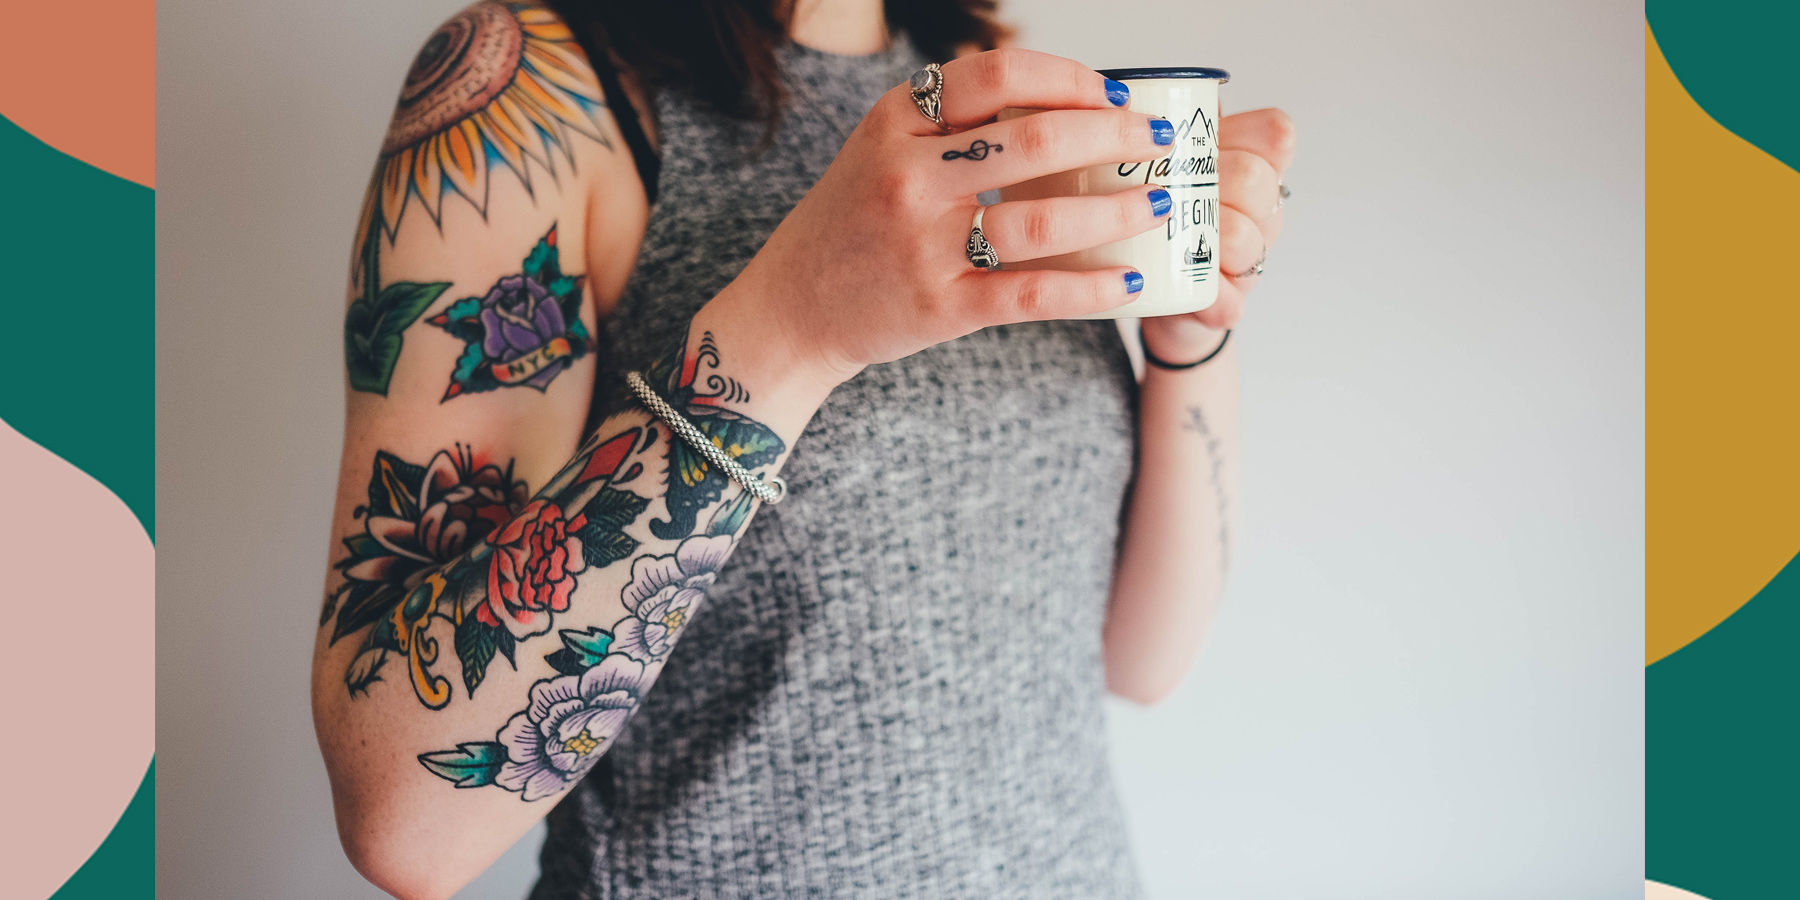 How to Take Care of a New Tattoo: Tattoo Aftercare InstructionsHelloGiggles